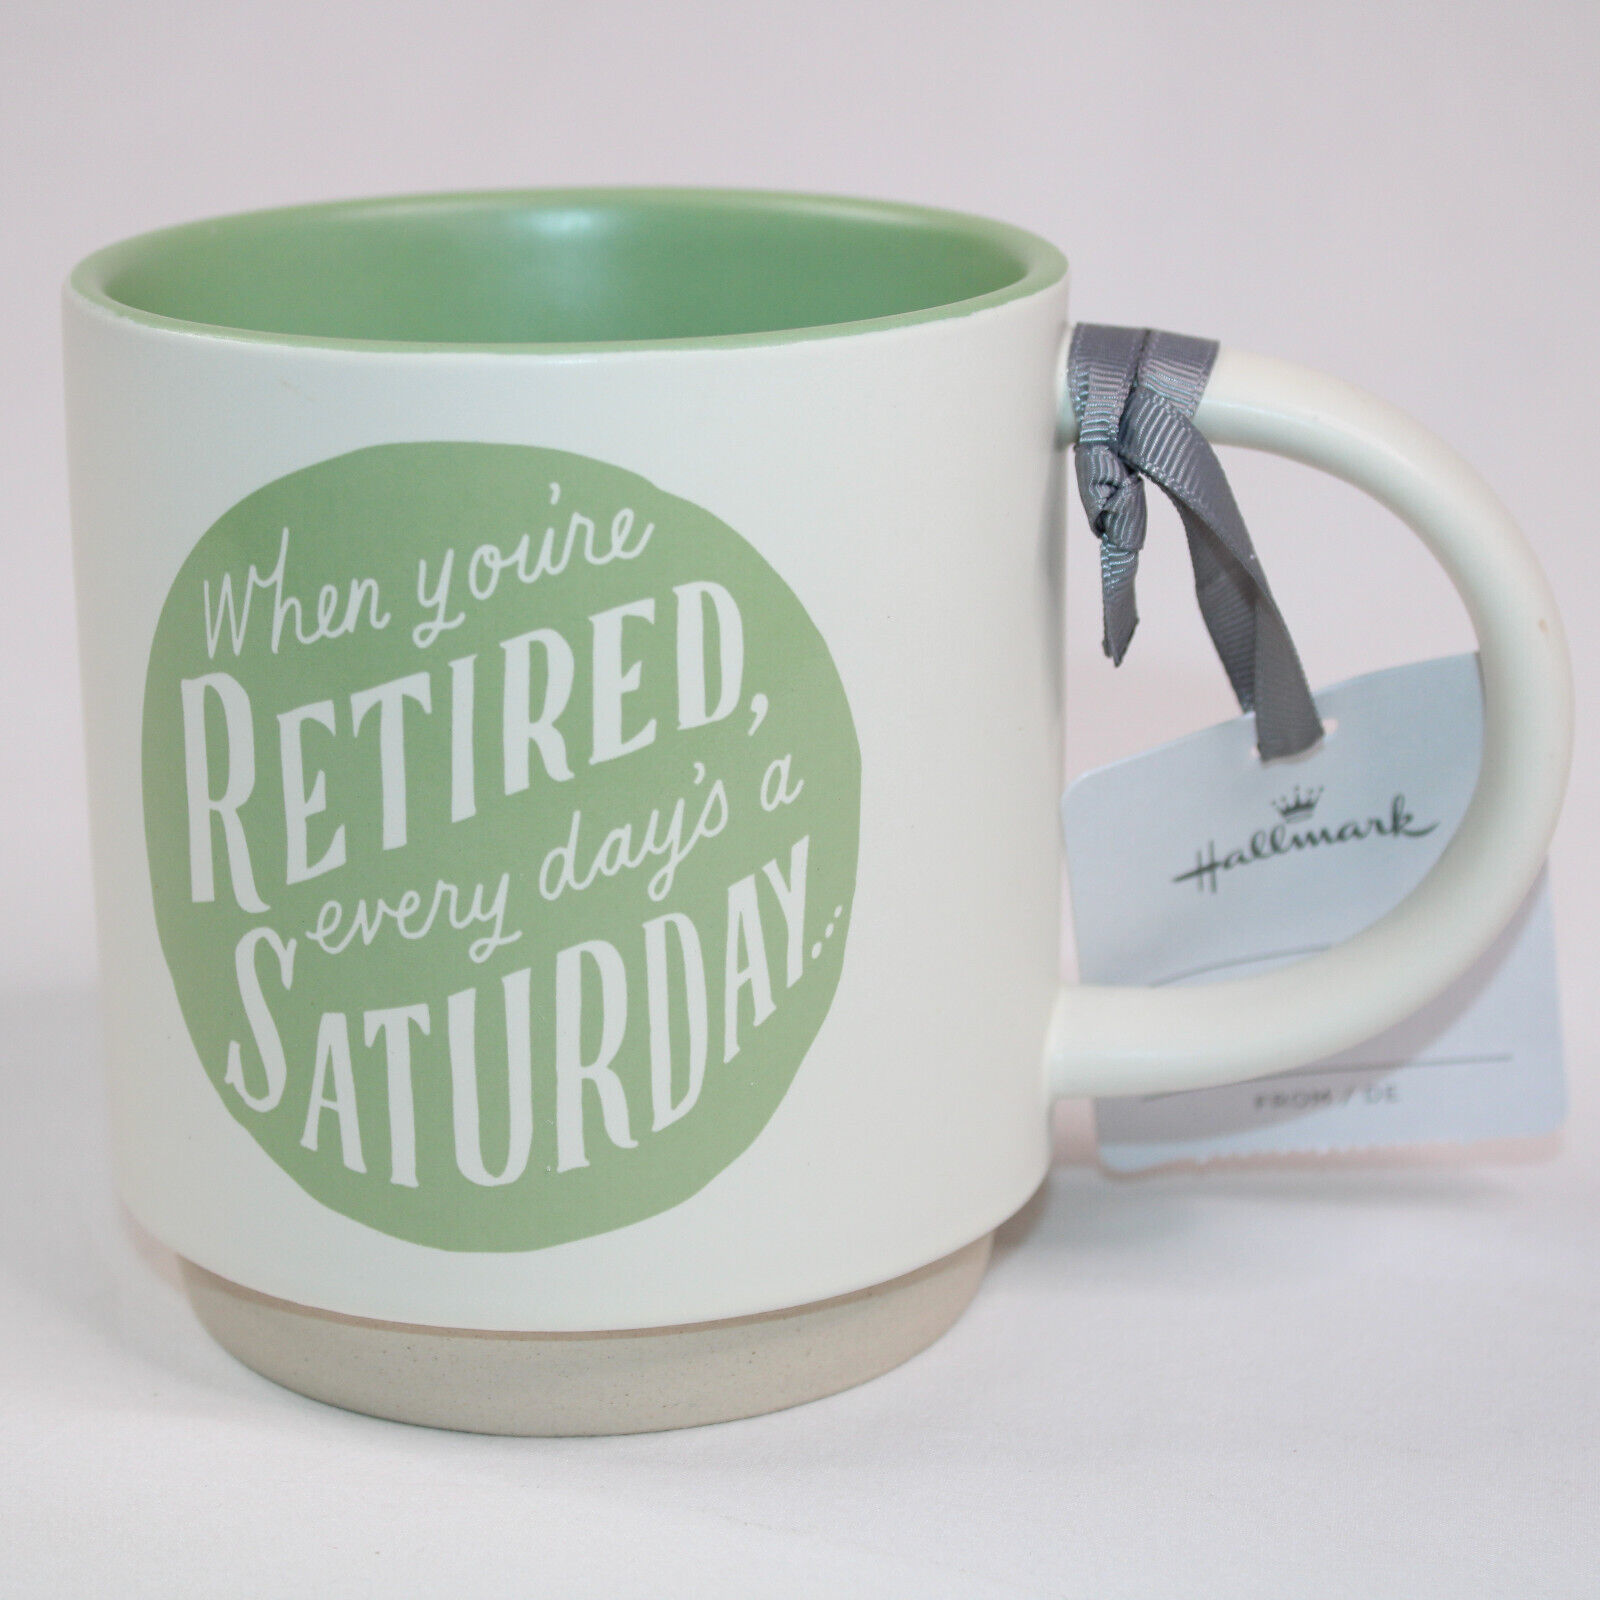 Retirement Coffee Mug Hallmark Gift Cup NEW With Tag Green And Cream In Color - $10.23